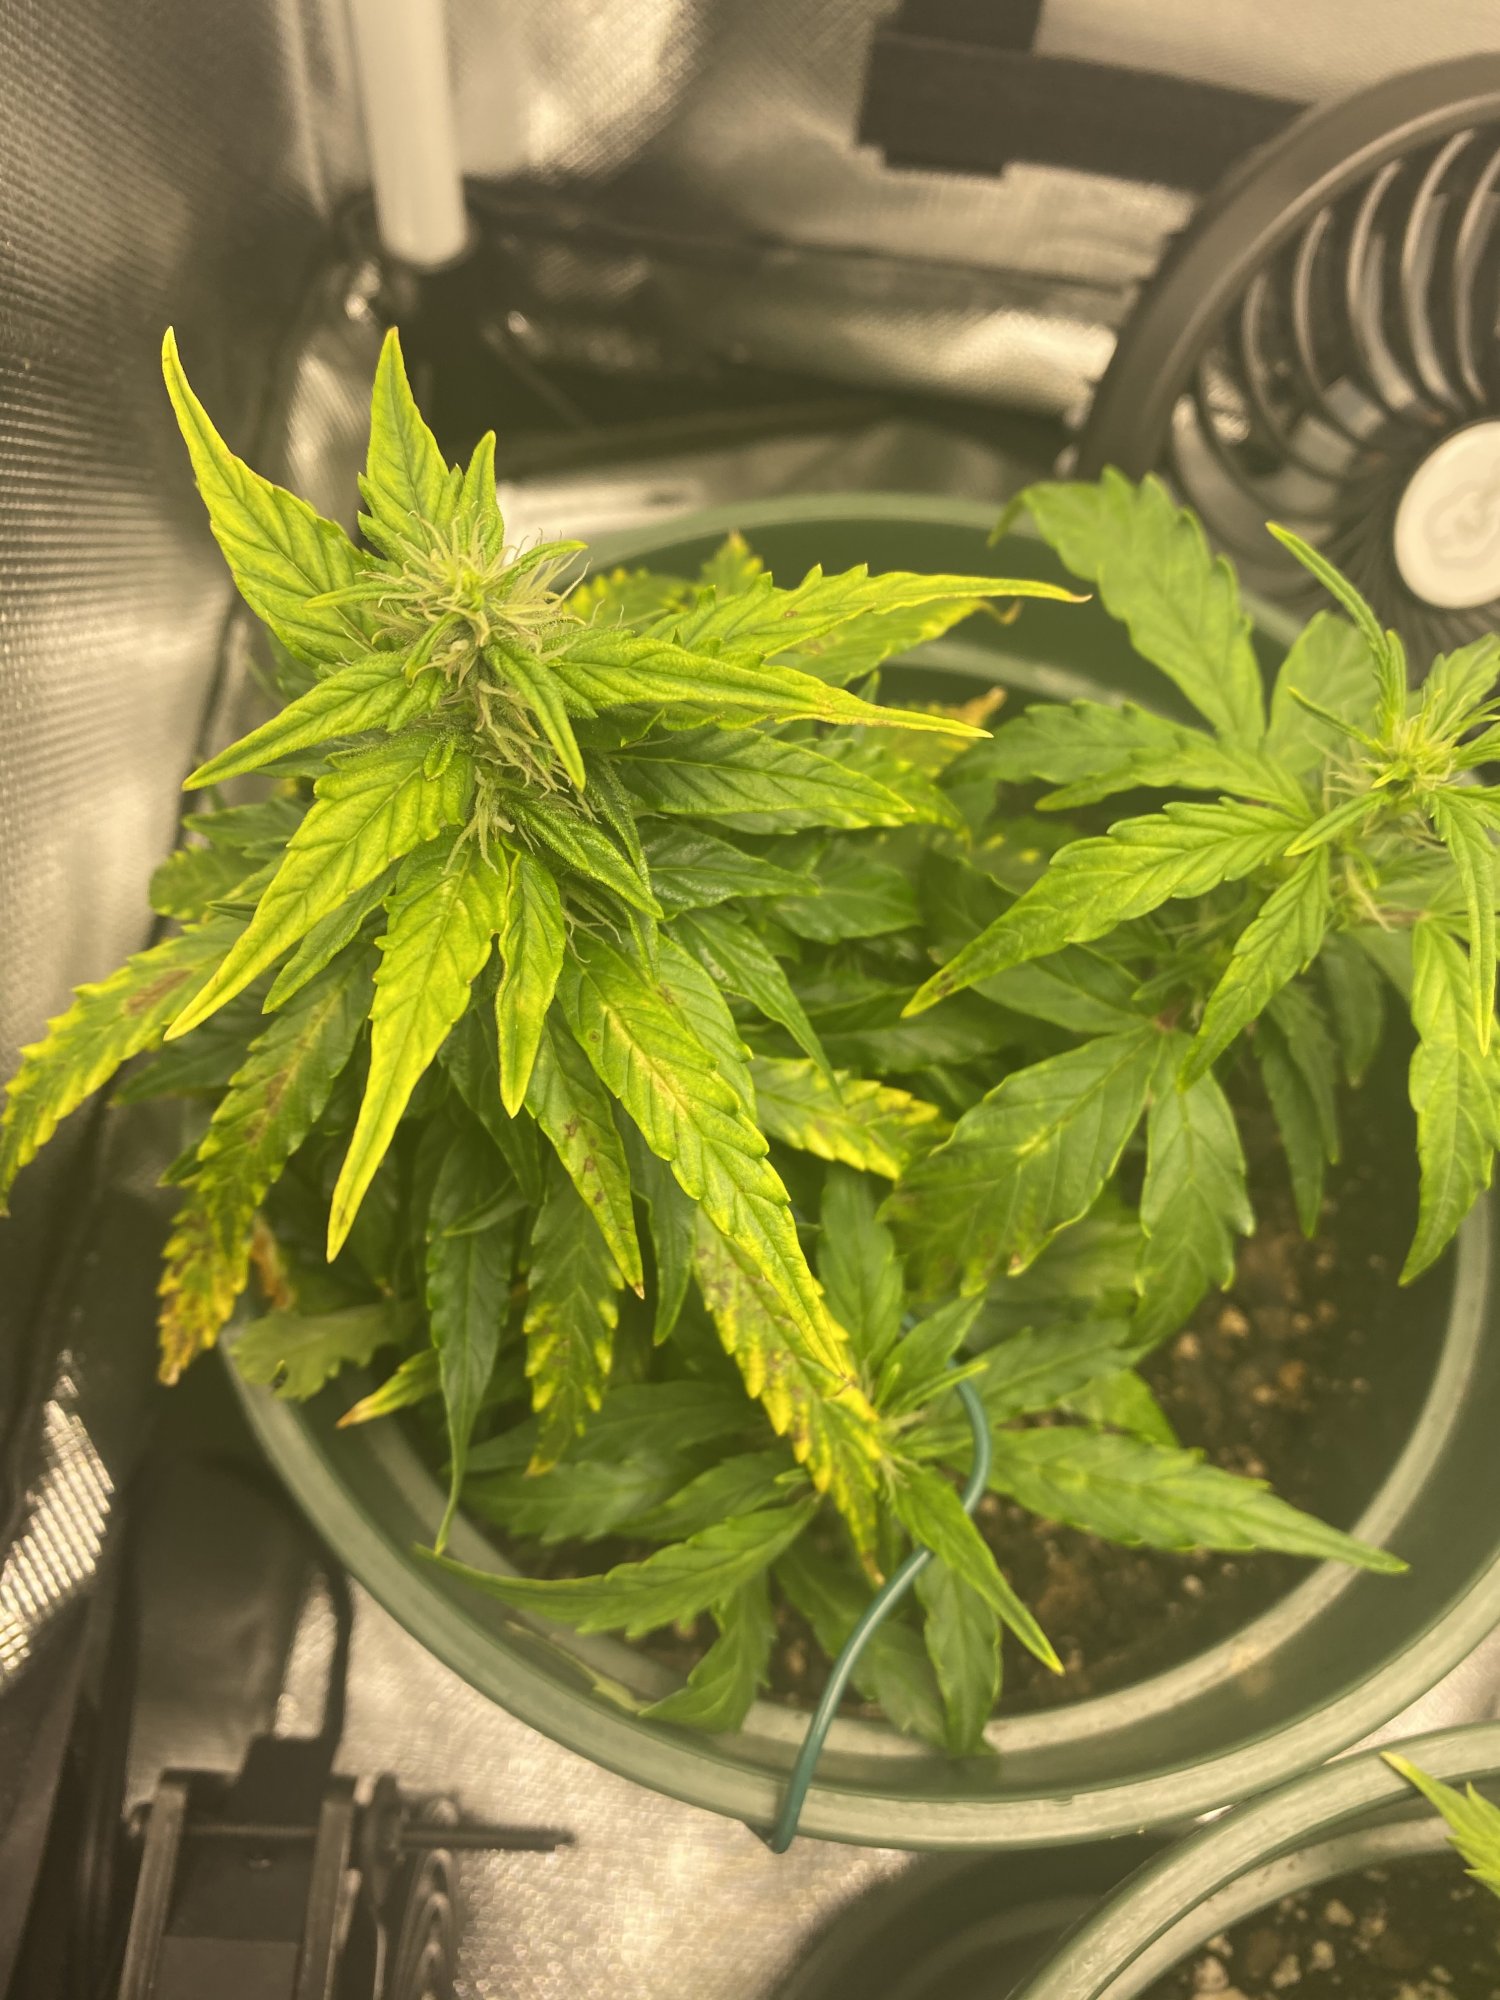 Please help my plants was showing some yellowing and browning a week ago 2